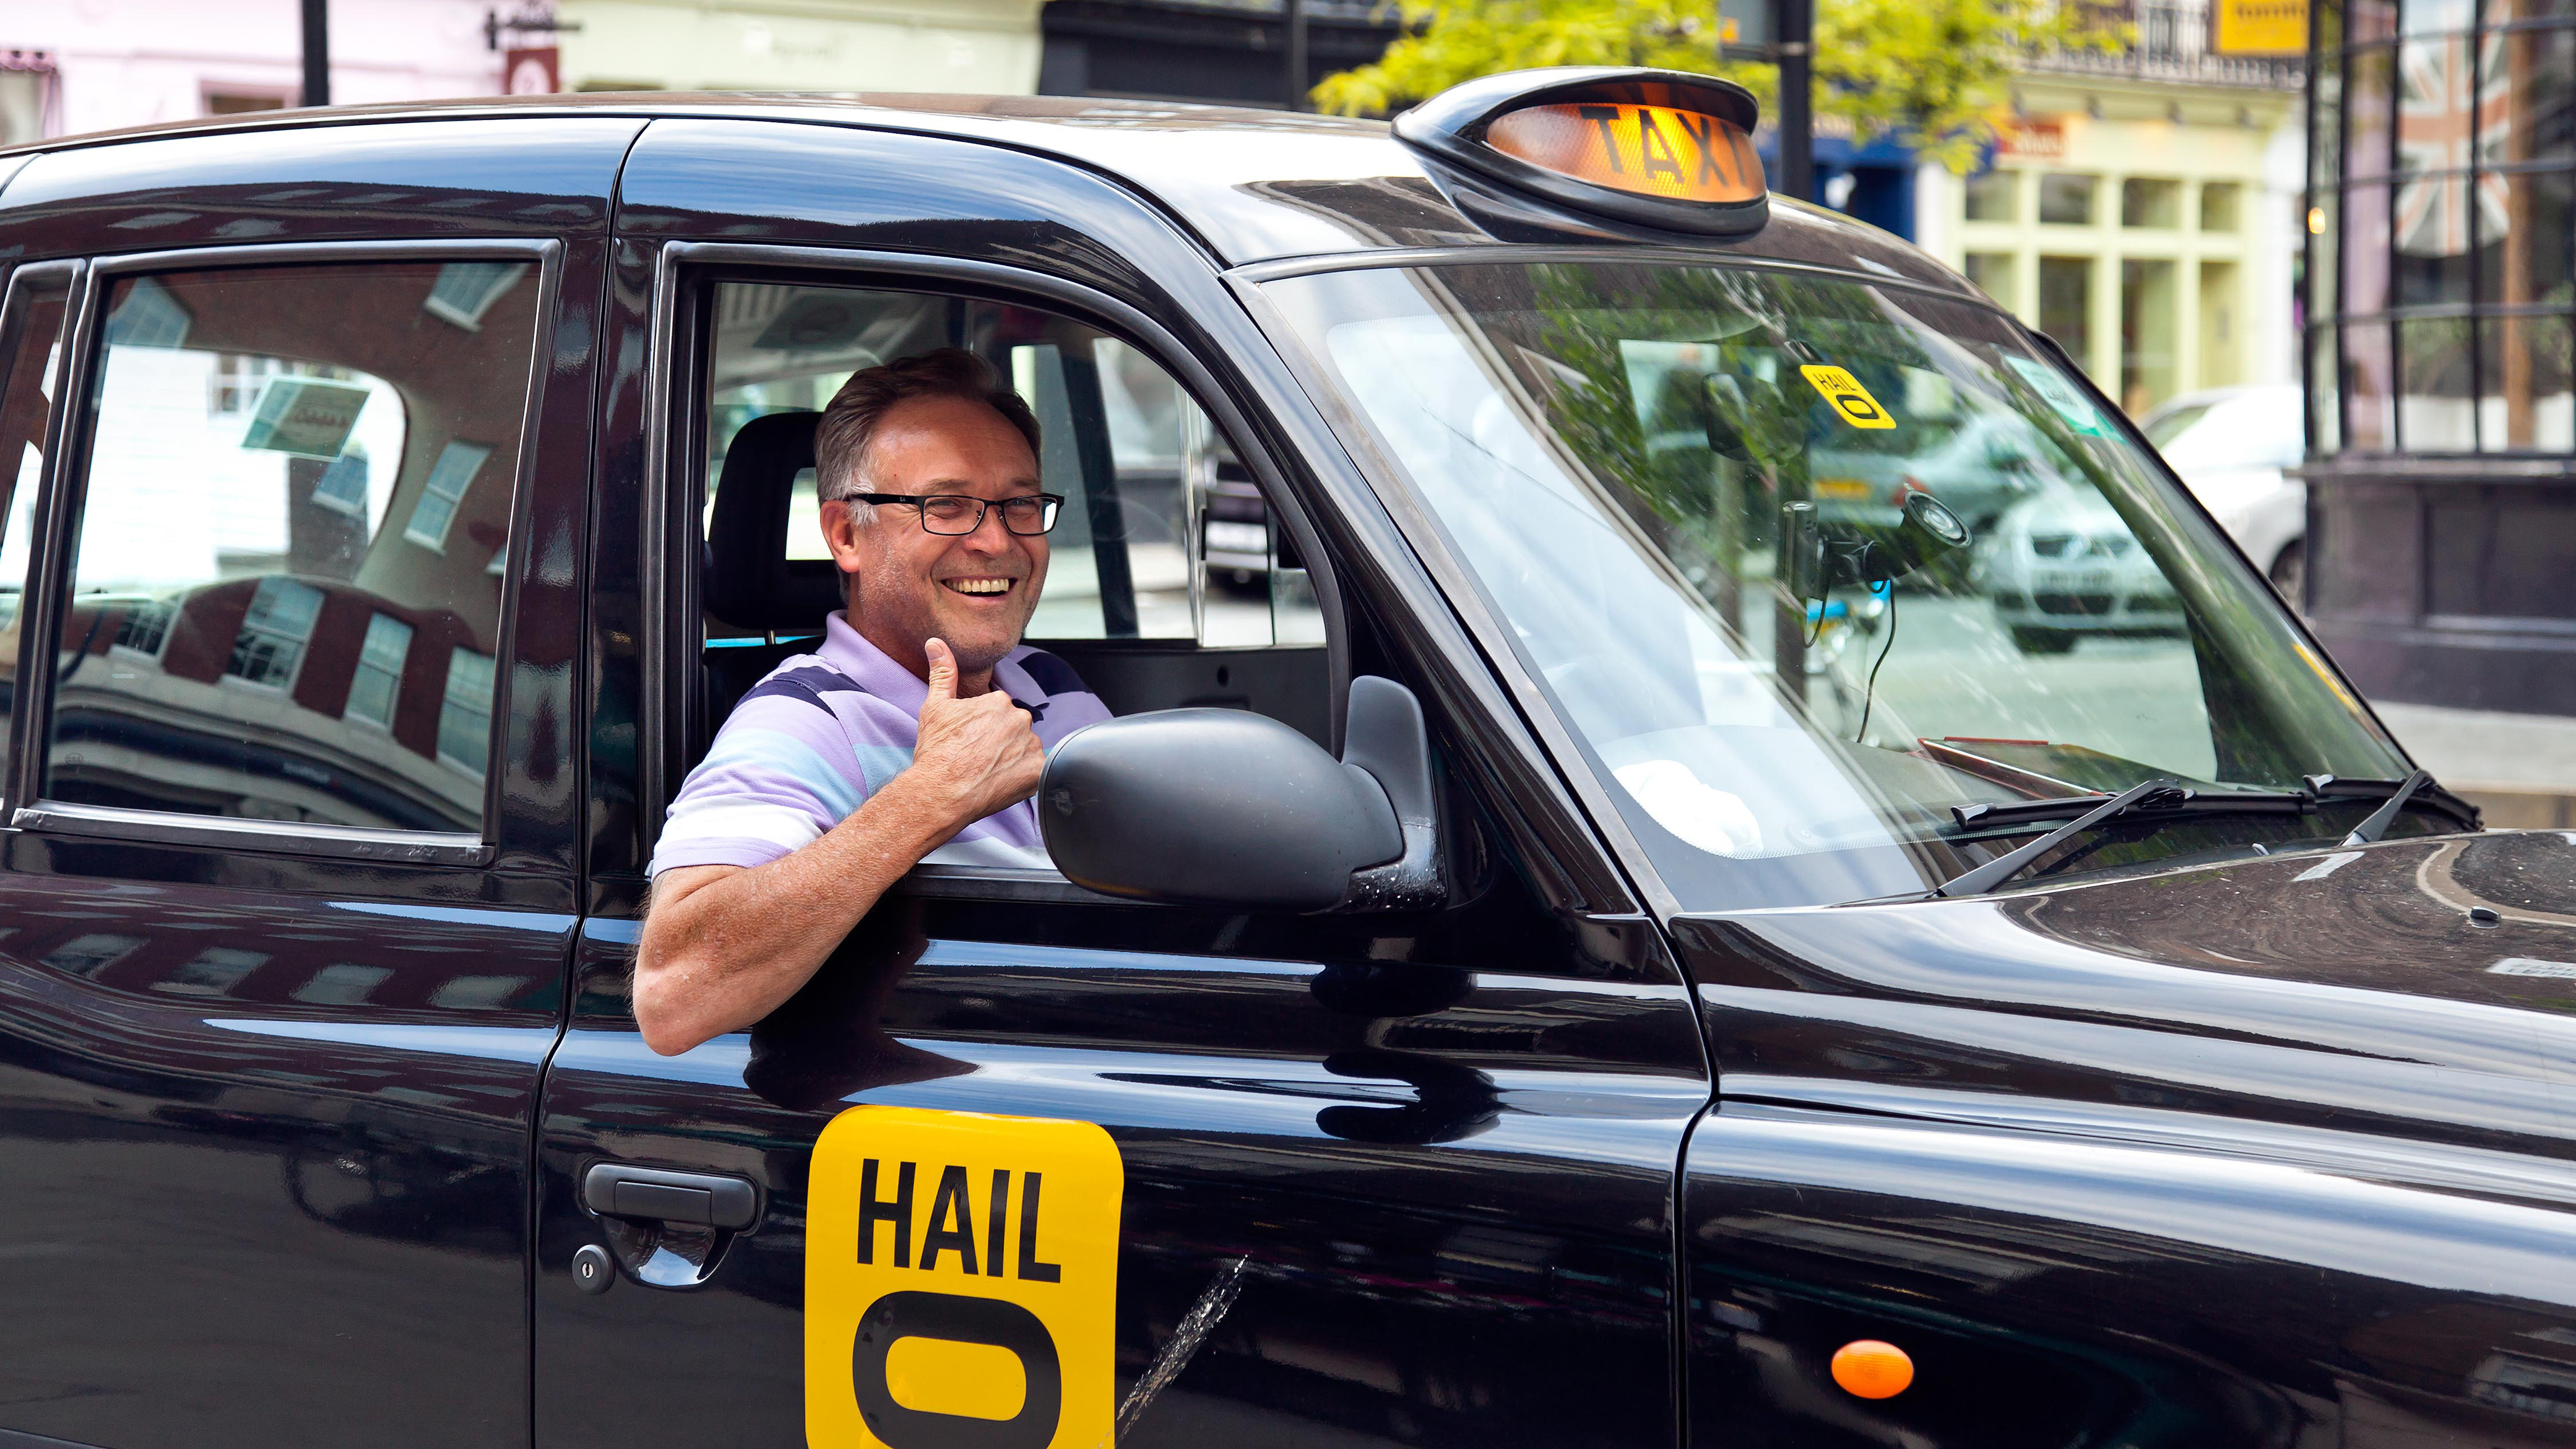 Avoiding Taxi Scams in Europe by Rick Steves